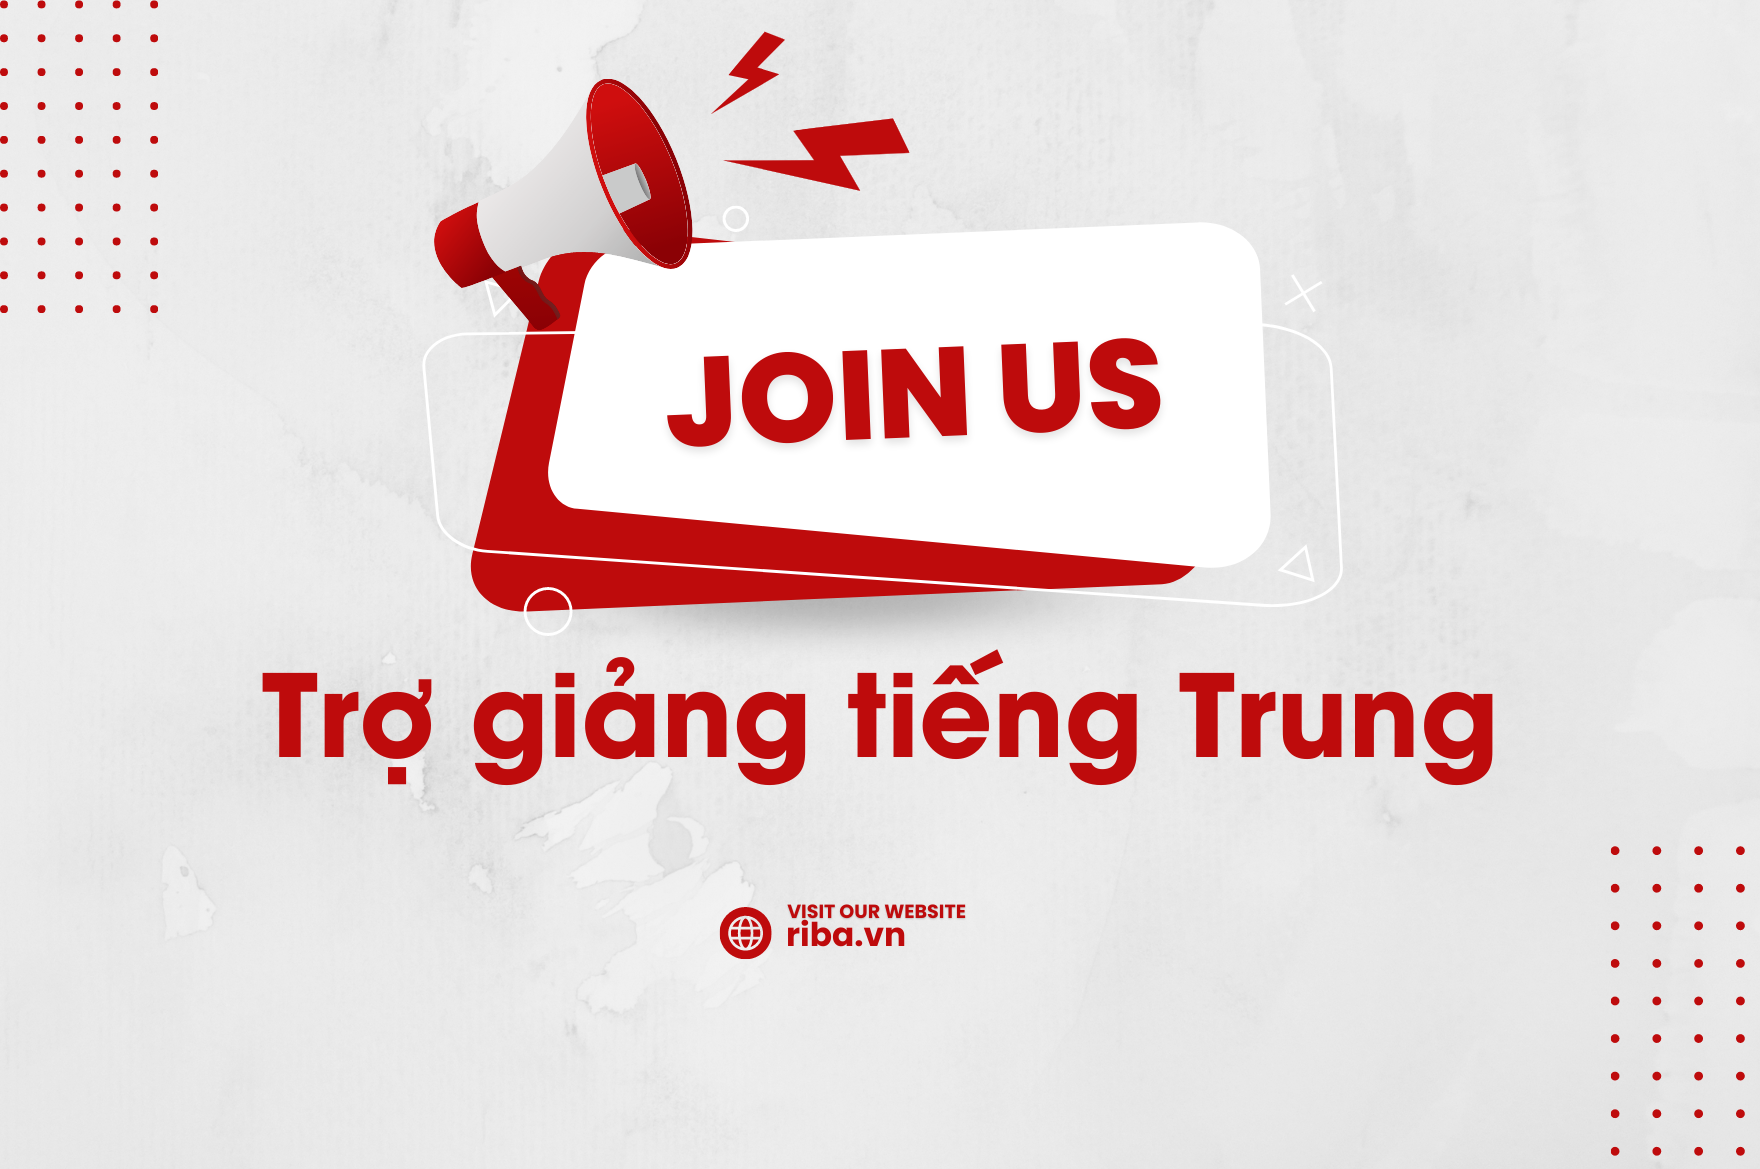 Trợ giảng tiếng Trung